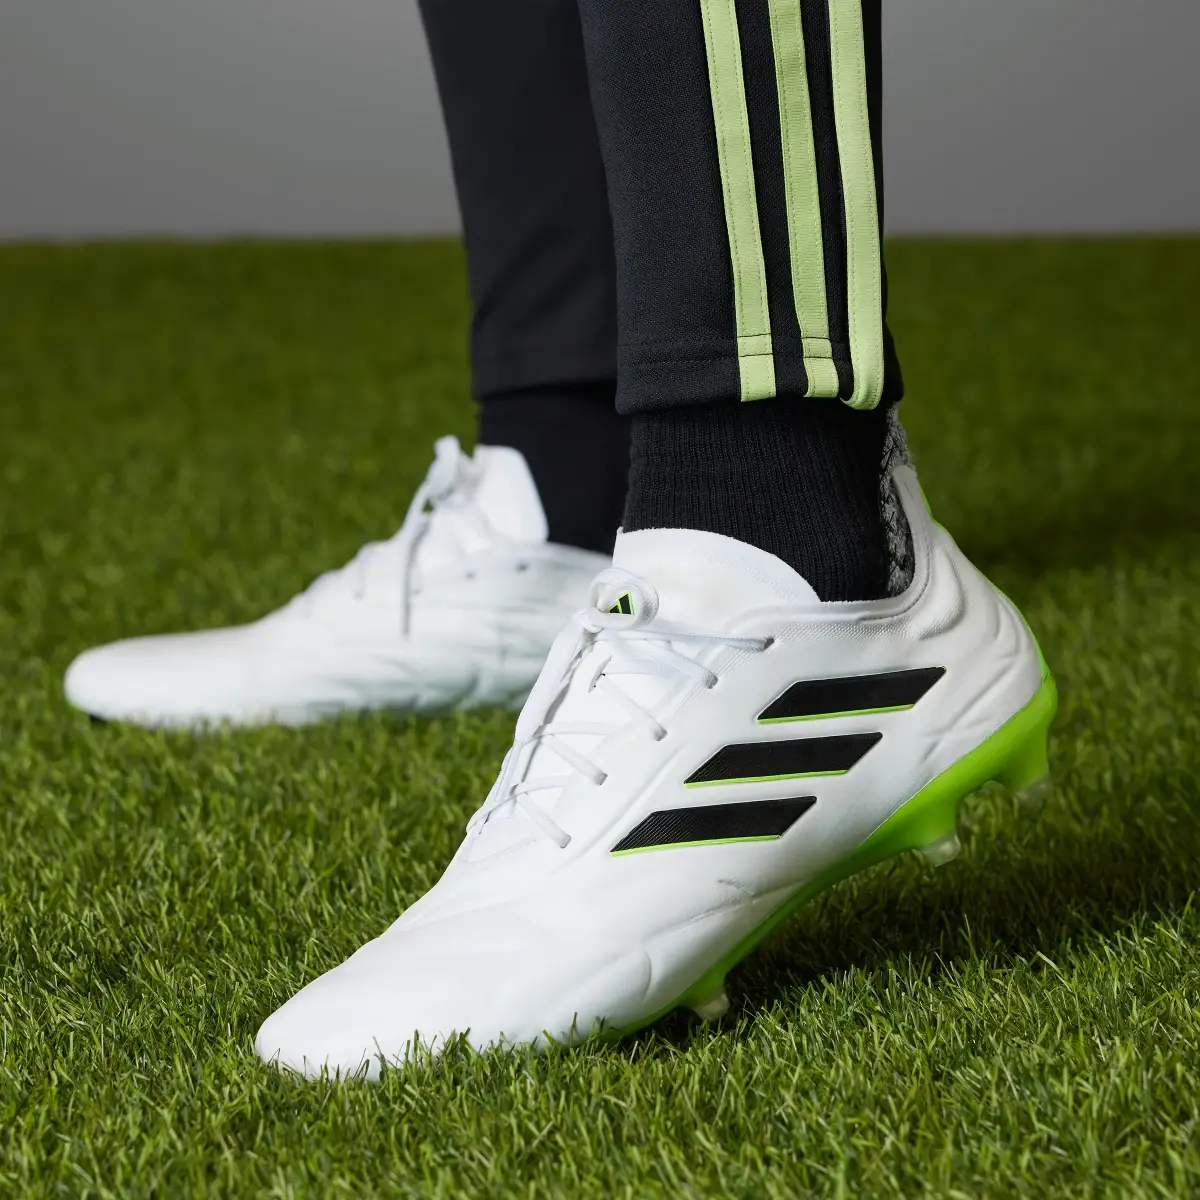 Adidas Copa Pure II.1 Firm Ground Boots. 2